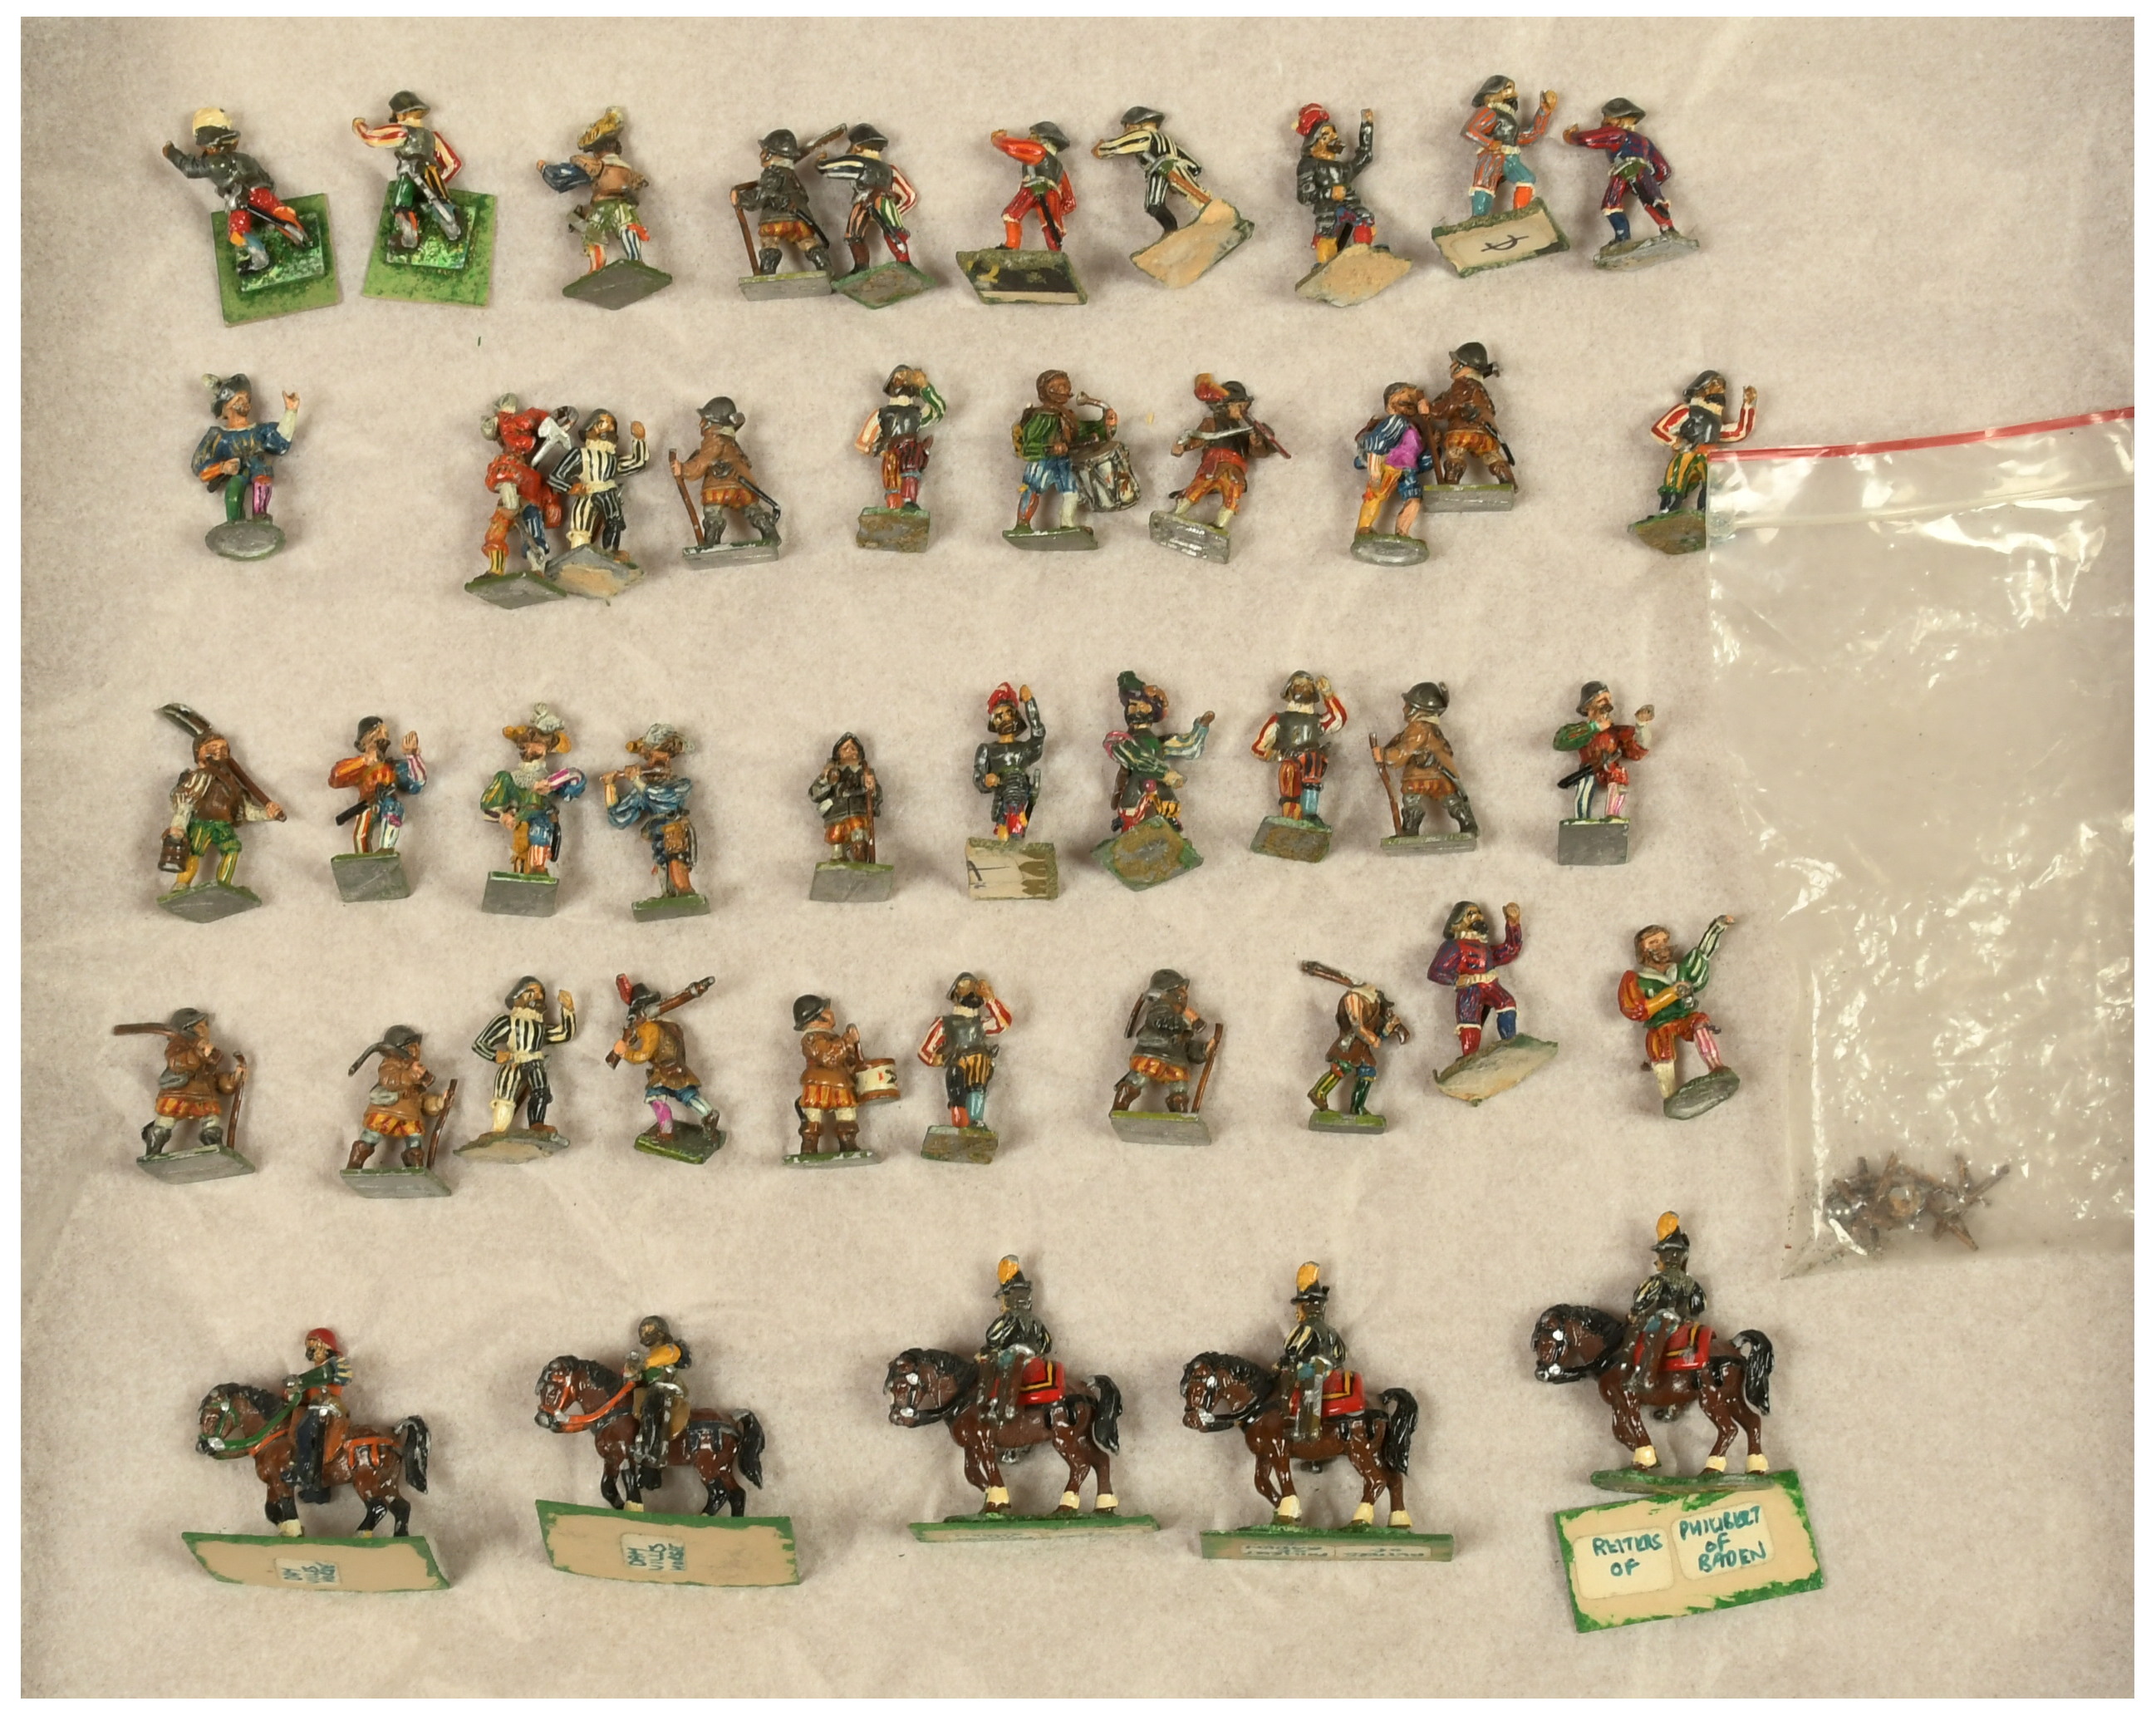 Quantity of Lead / White Metal Painted Wargaming Figures